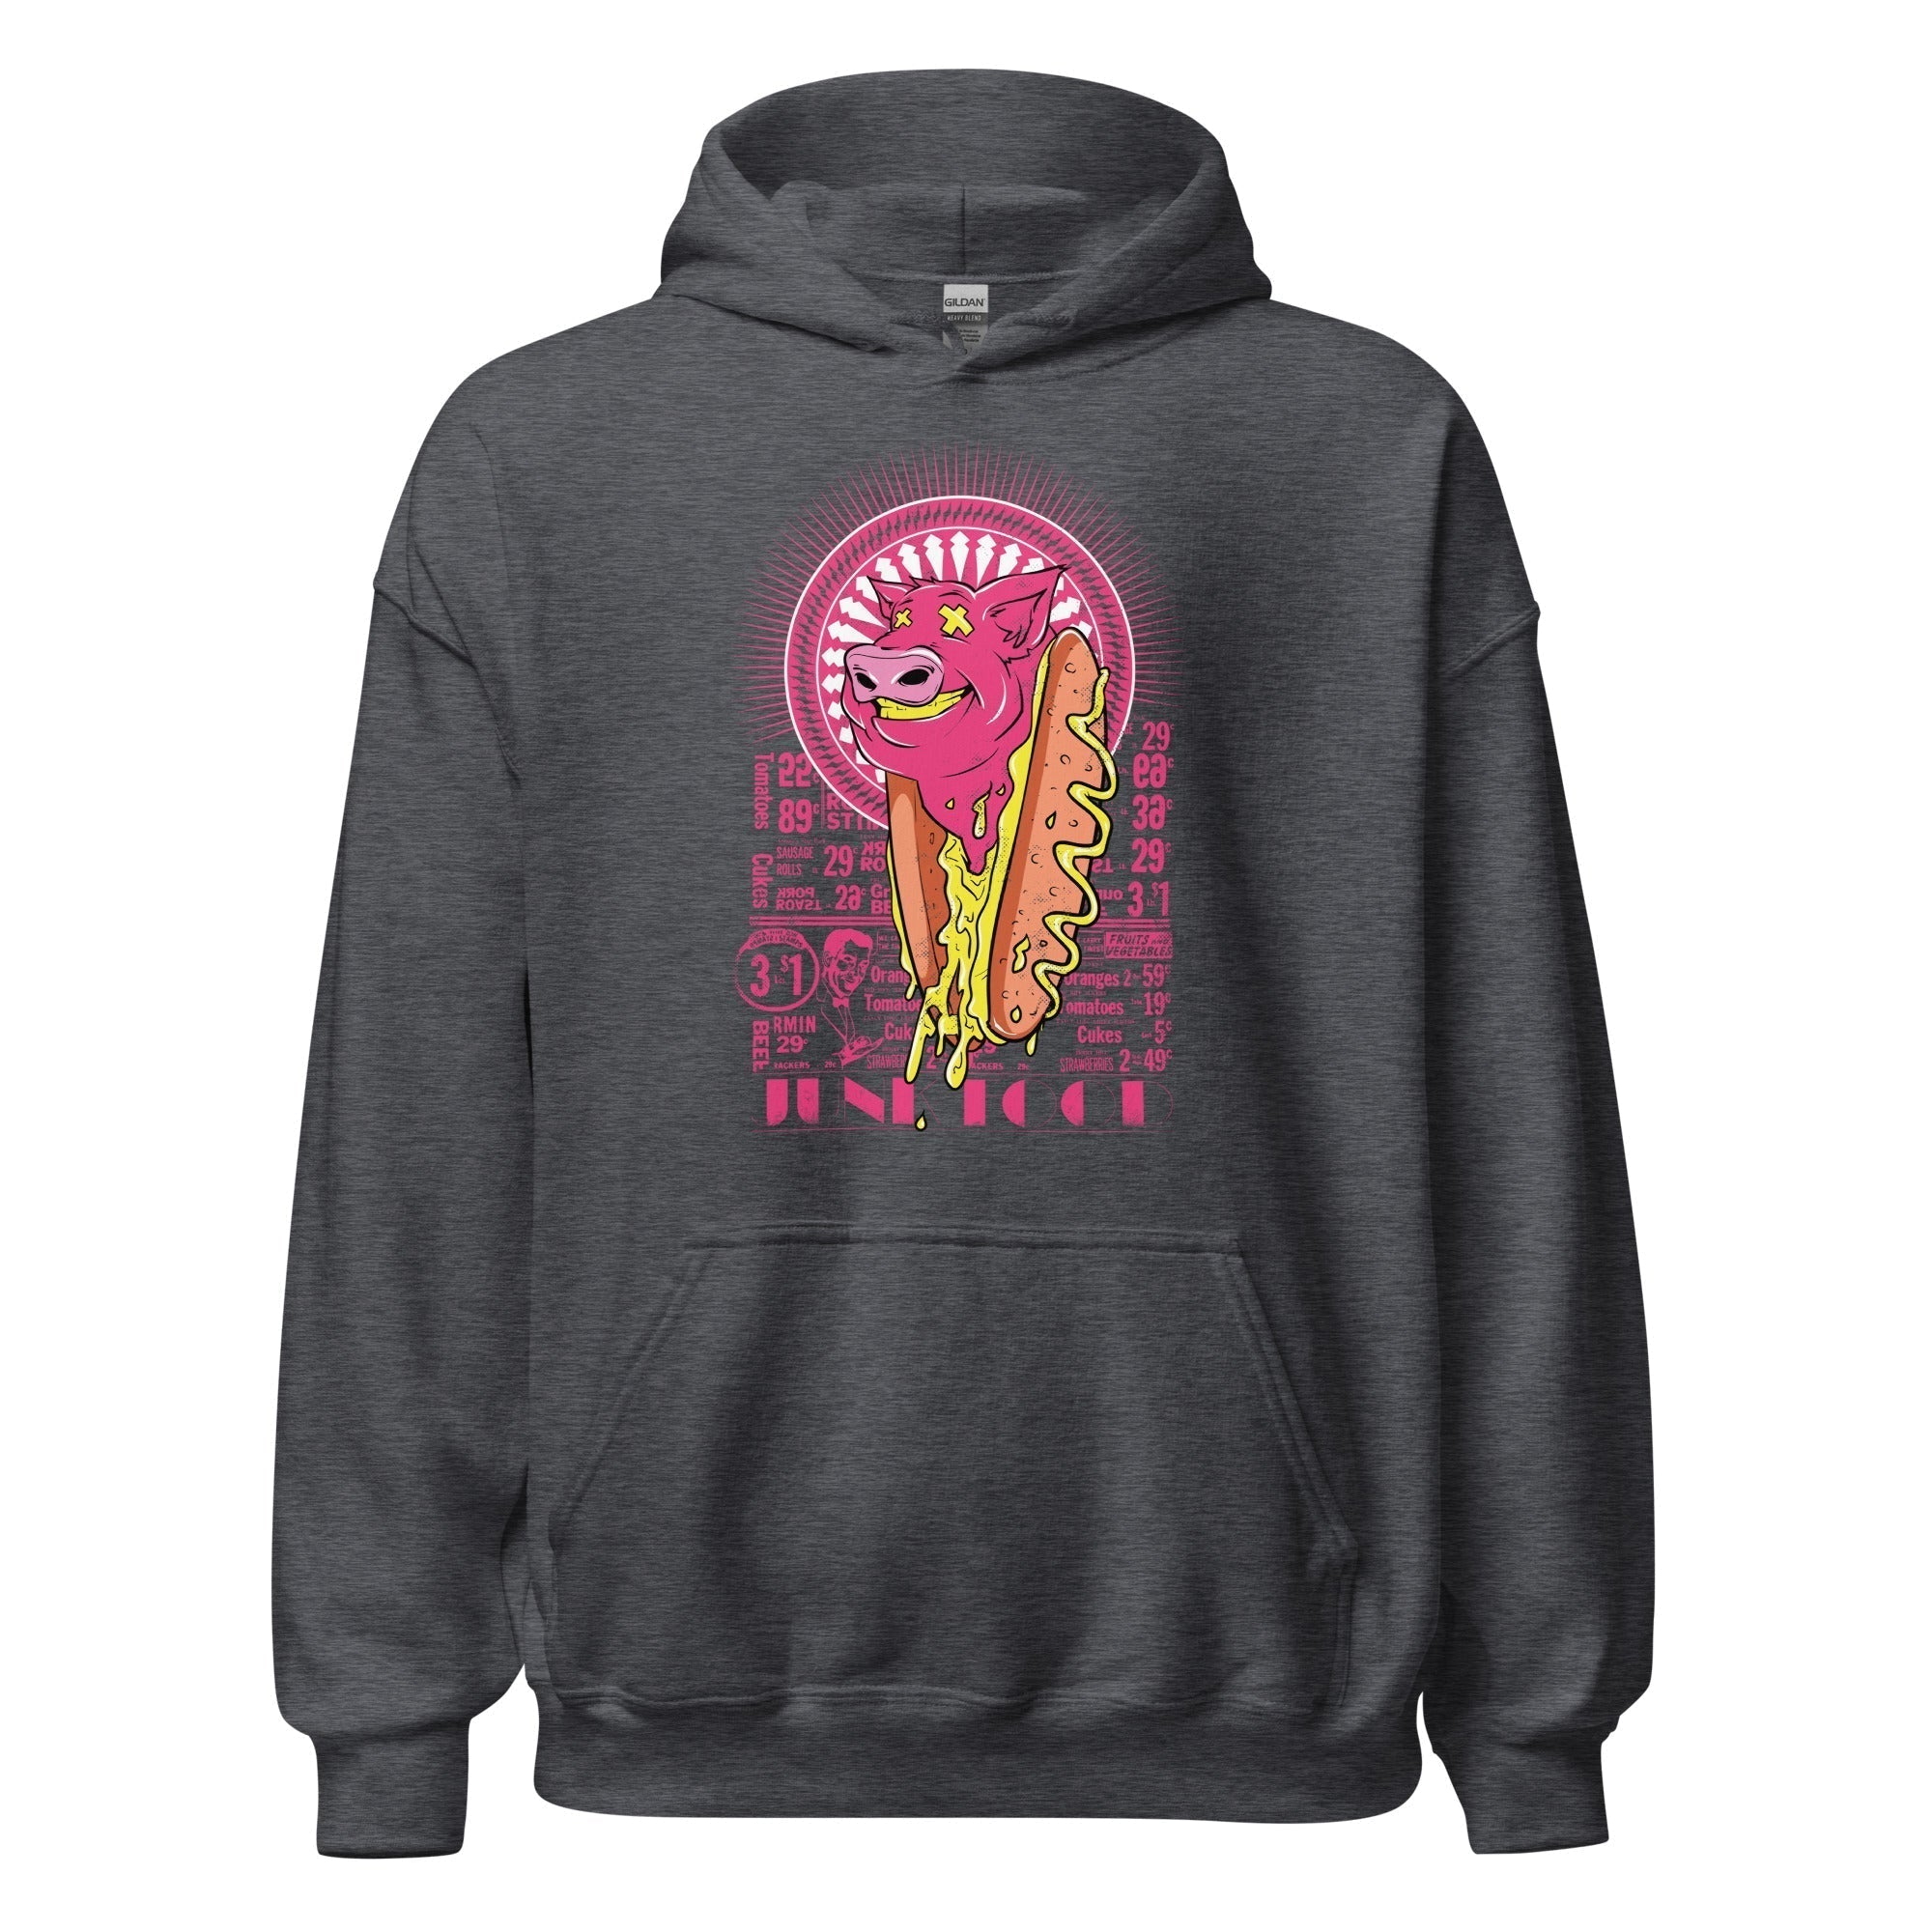 Unisex Heavy Blend Hoodie - Pink Hot Dogs - GRAPHIC T-SHIRTS